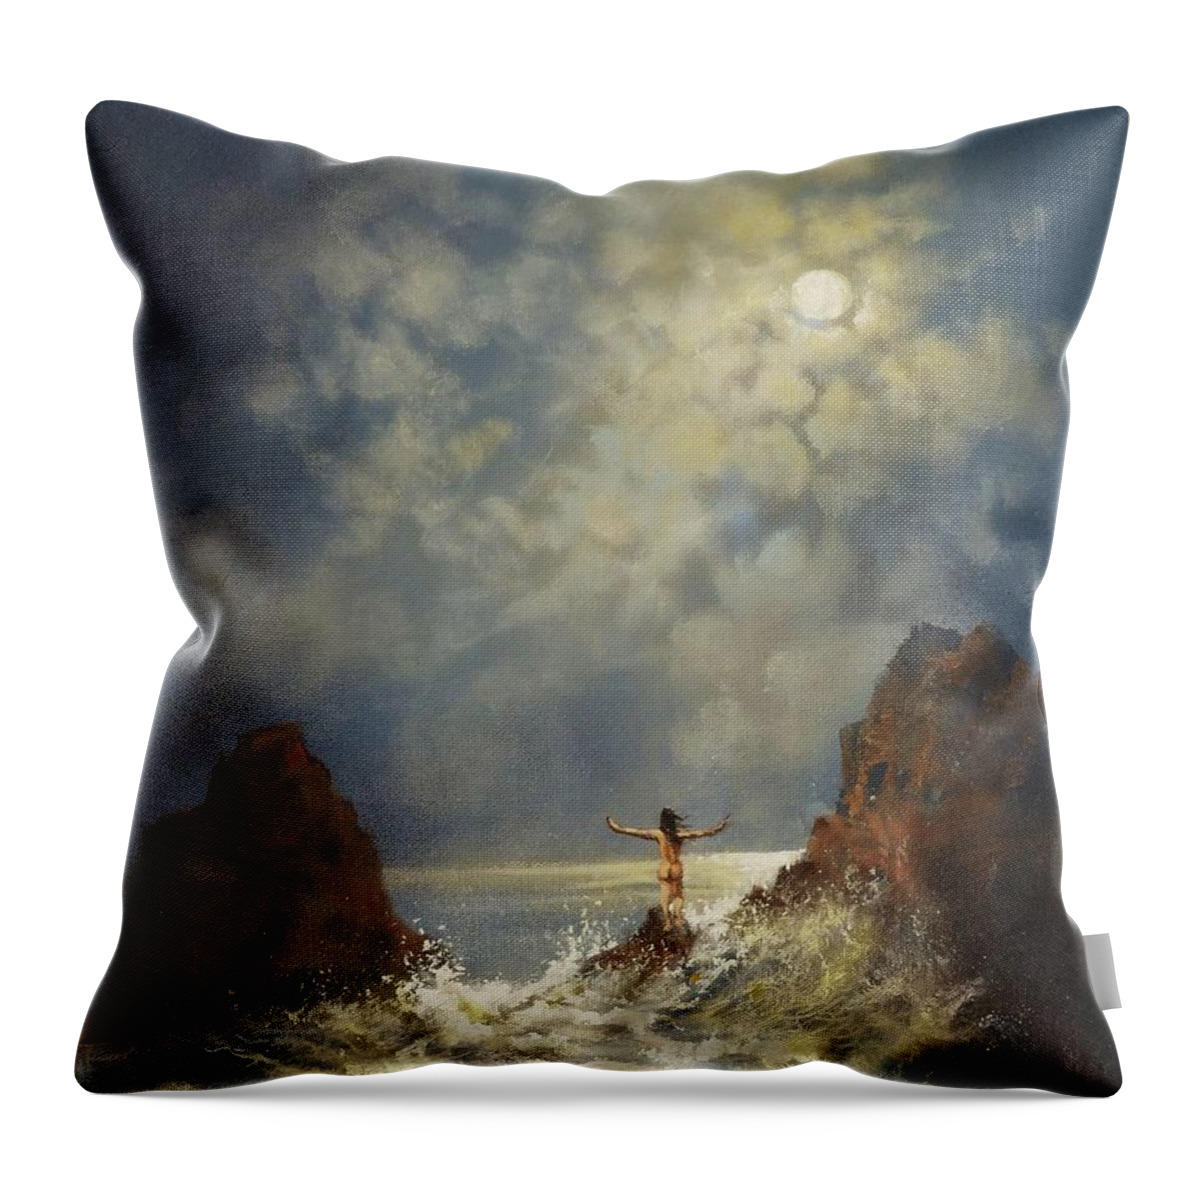 Sorceress Throw Pillow featuring the painting A Summoning by Tom Shropshire